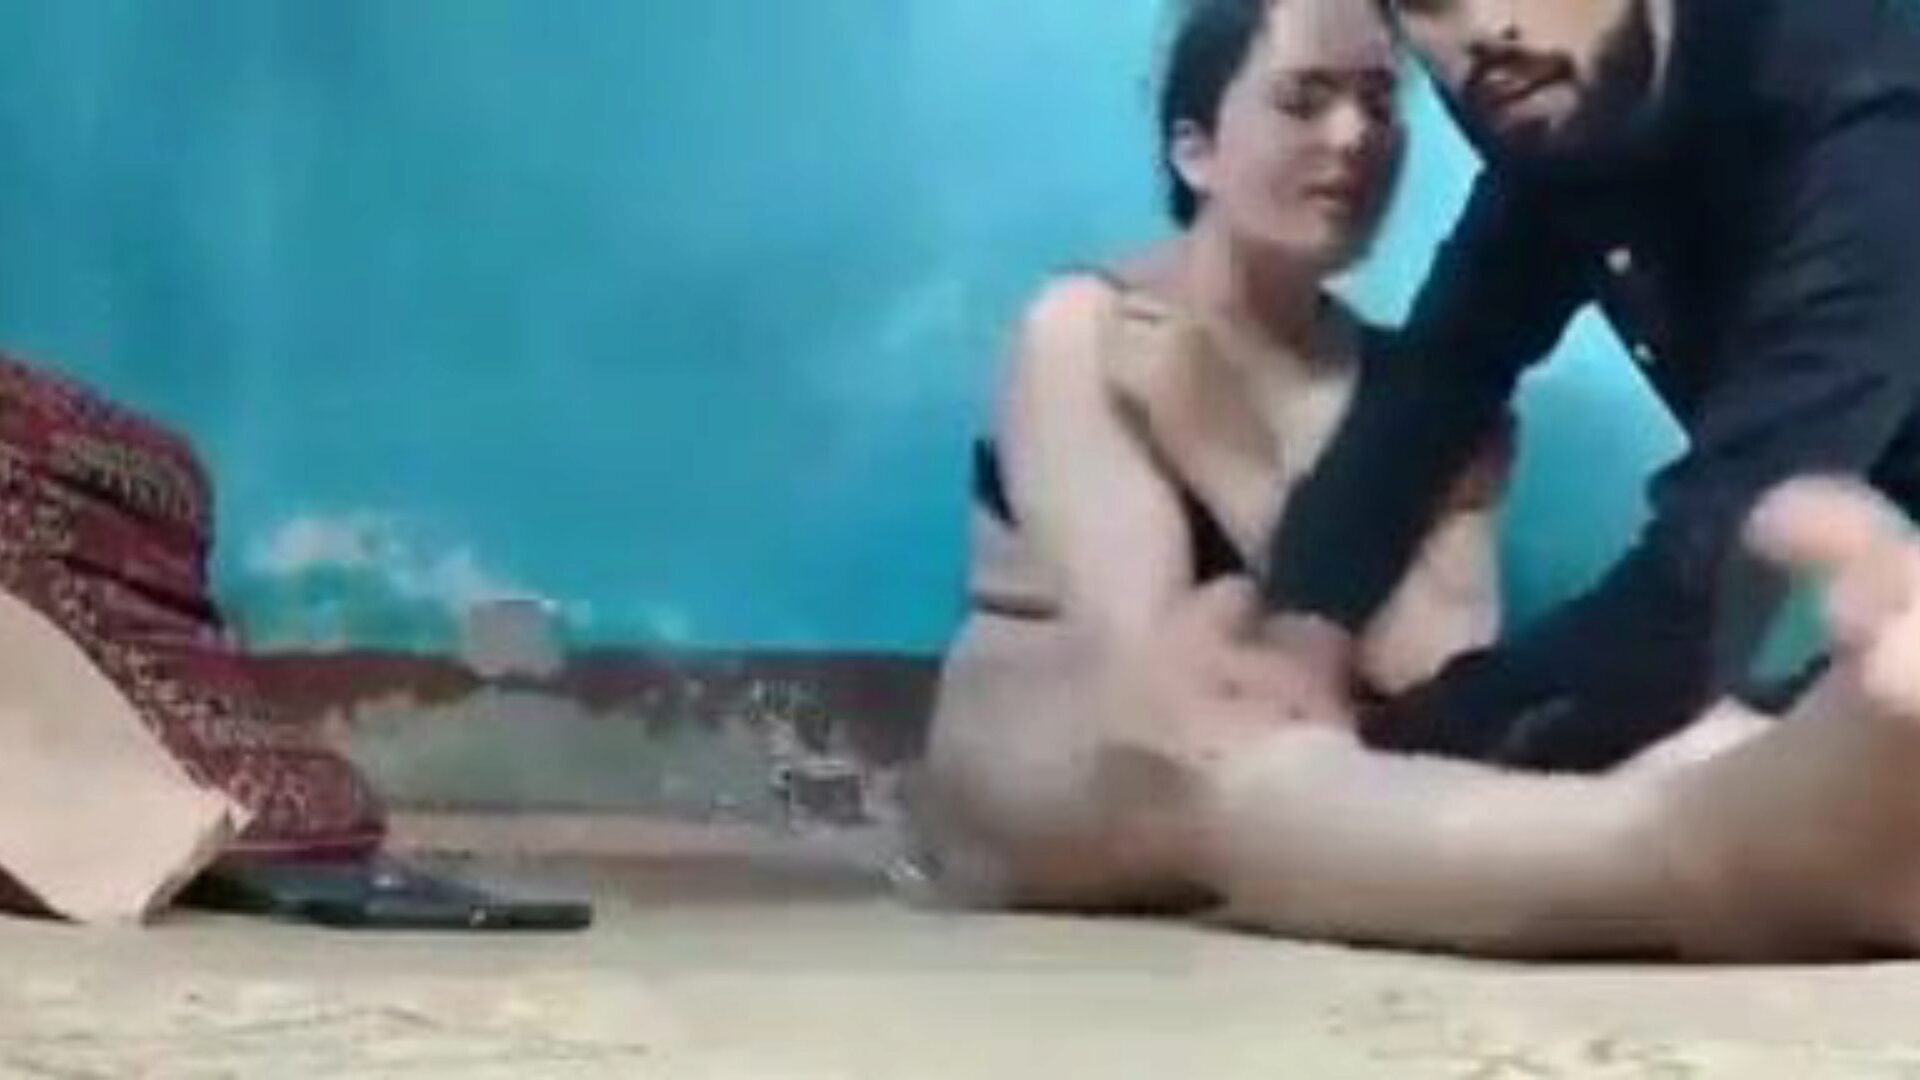 kashmiri sex video: free indian porn video 69 - xhamster watch kashmiri sex video tube bang-out video for free on xhamster, with the sexiest collection of indian xxx free sex & story porn epizód jelenetek